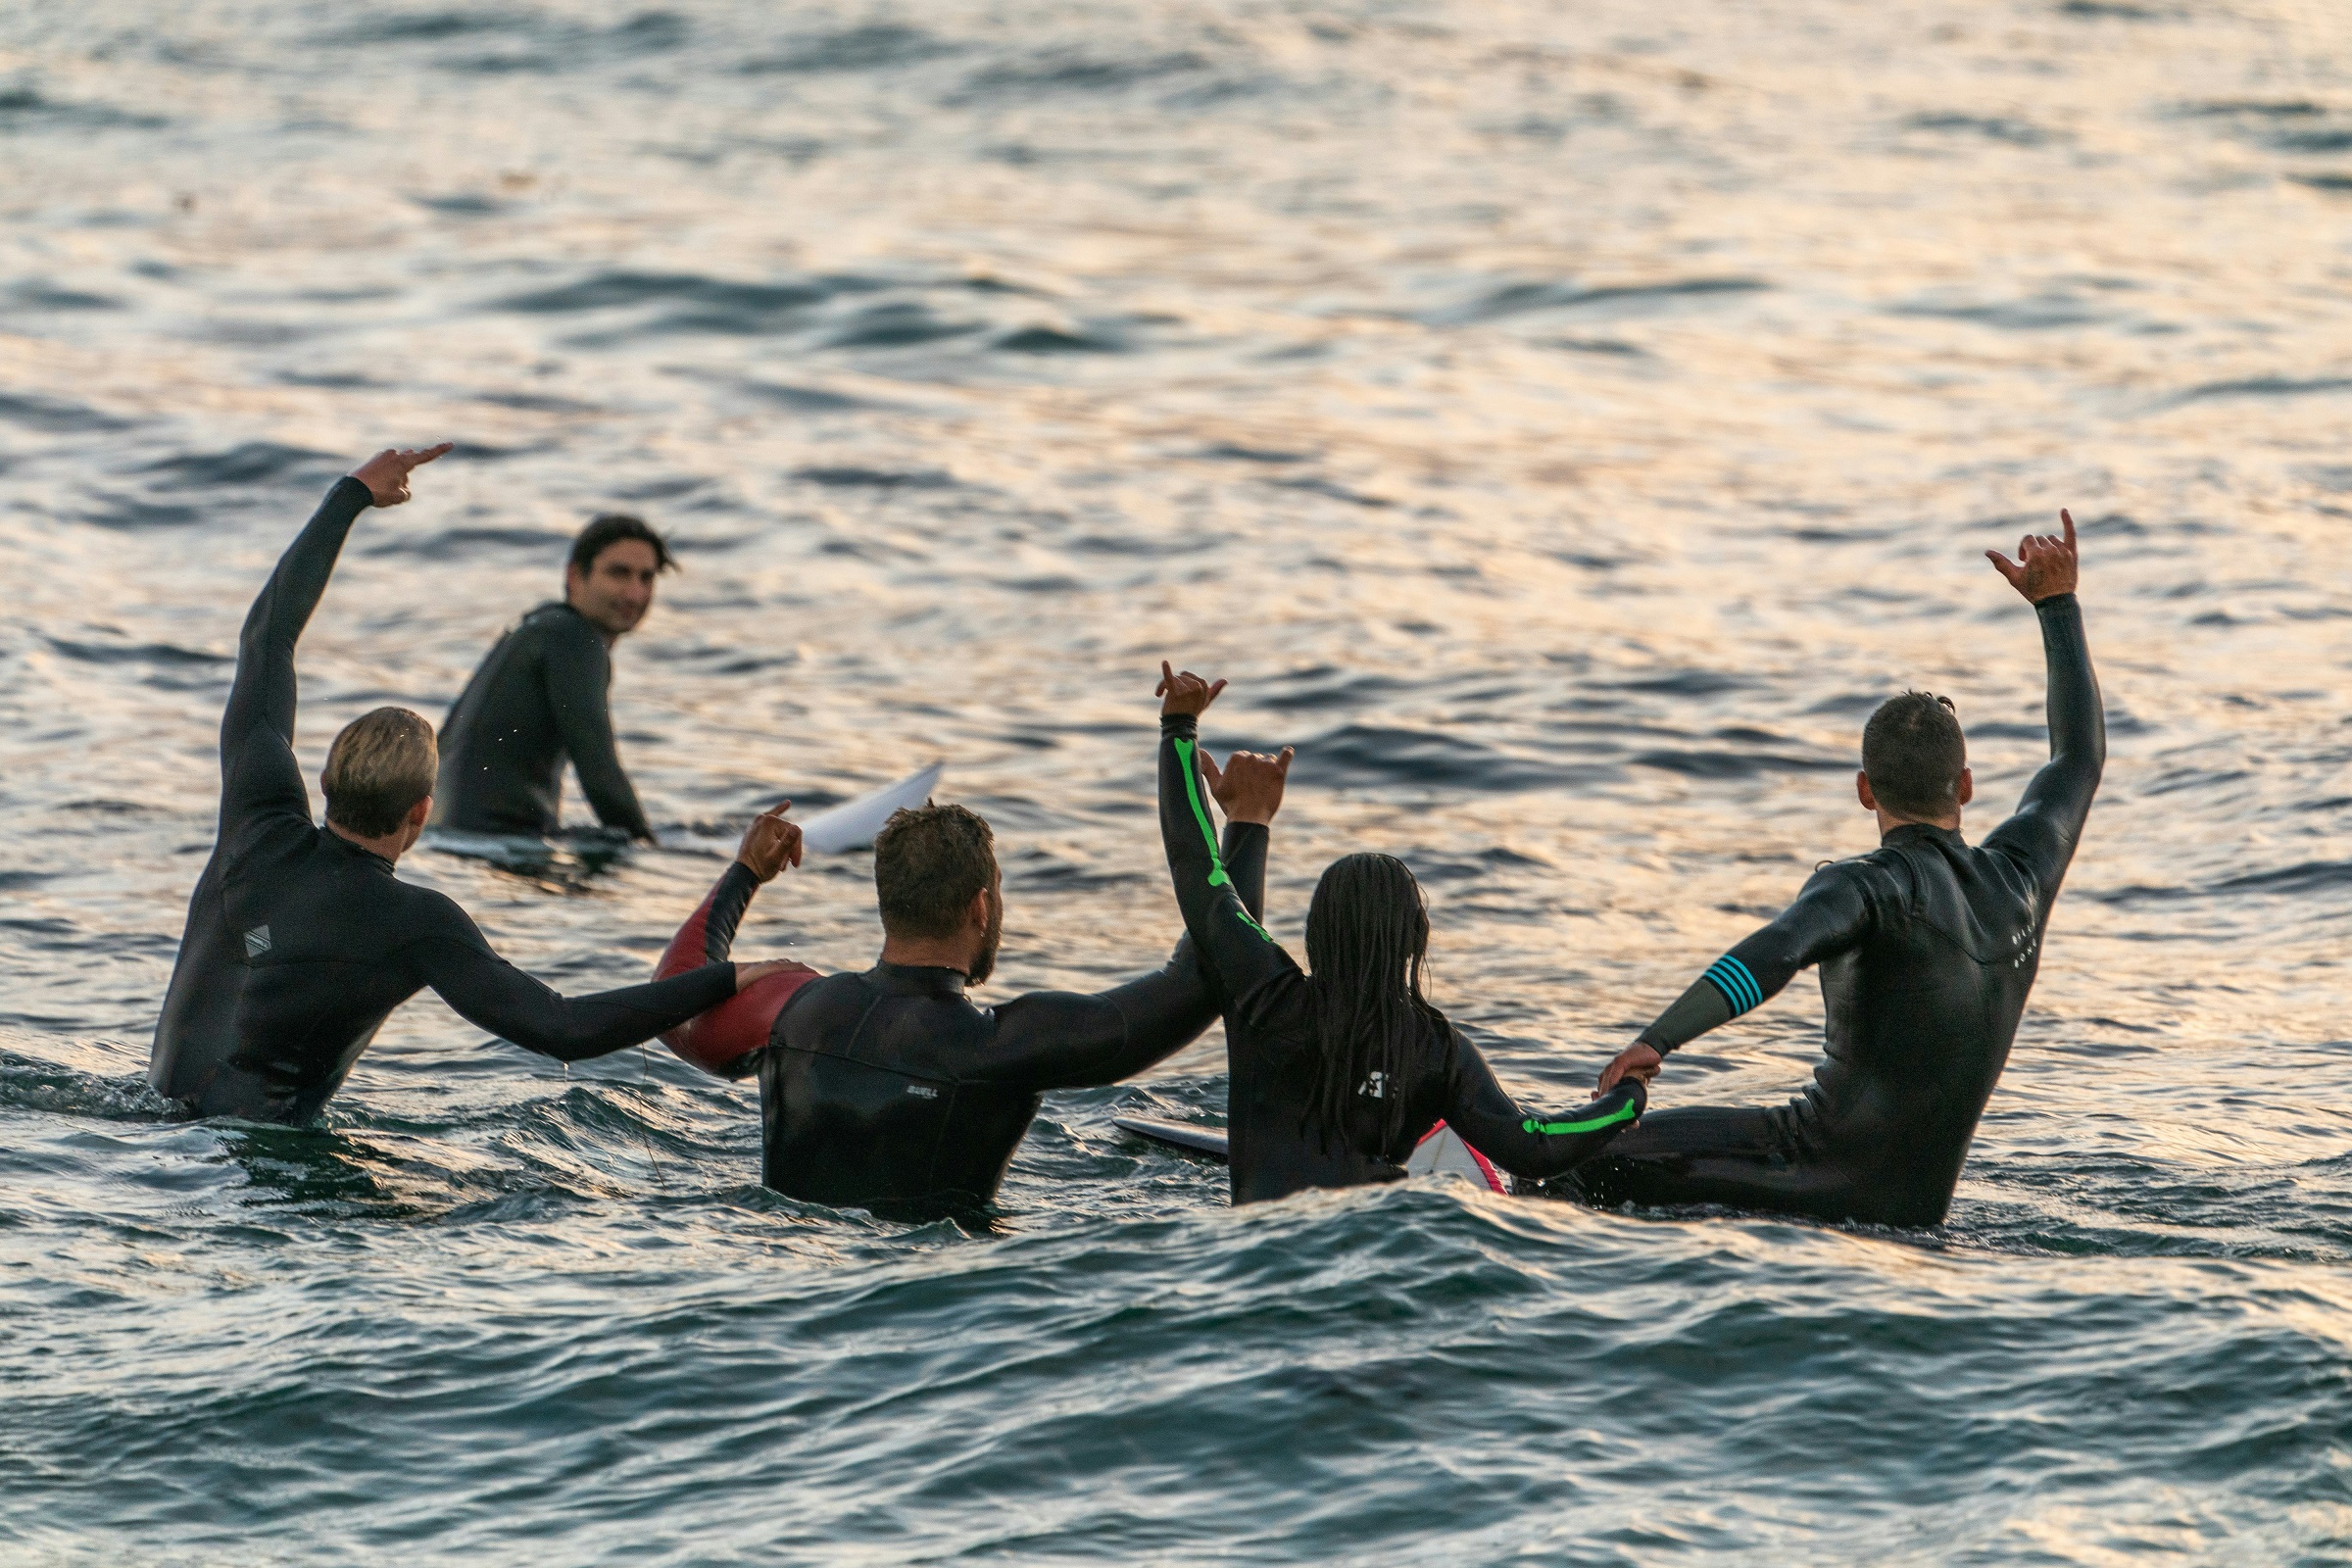 A group of people hang out together on surfboards in the middle of the ocean.